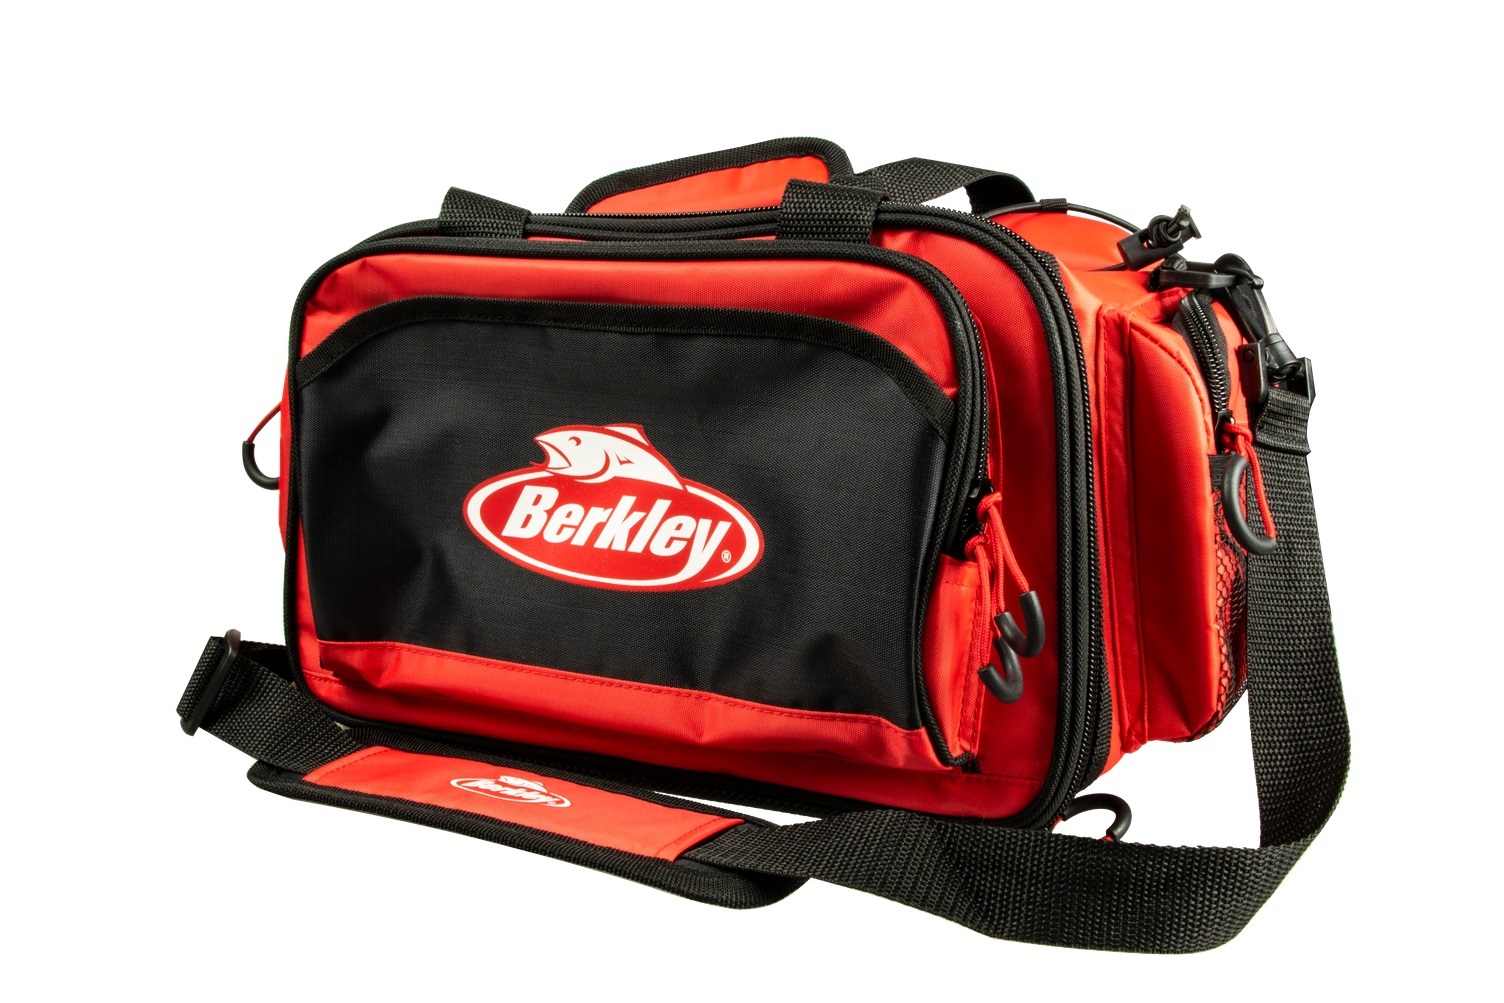 Berkley Large Fishing Tackle Bag With Two Tackle Trays -Multiple